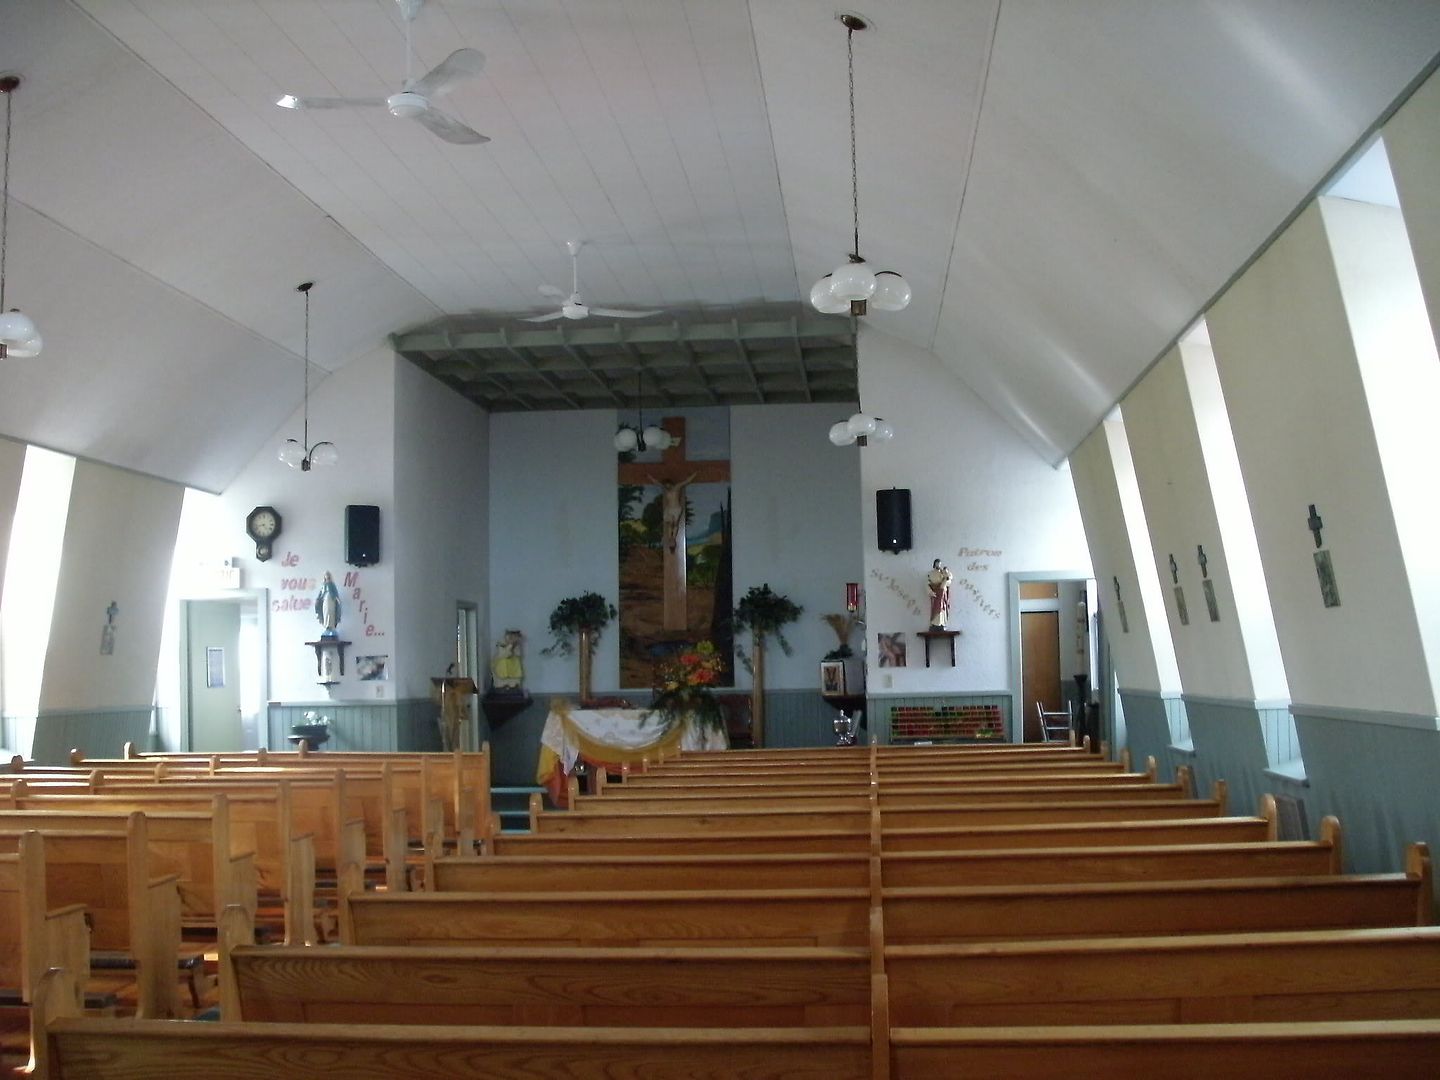 churches with fans in the québec | Vintage Ceiling Fans.Com Forums